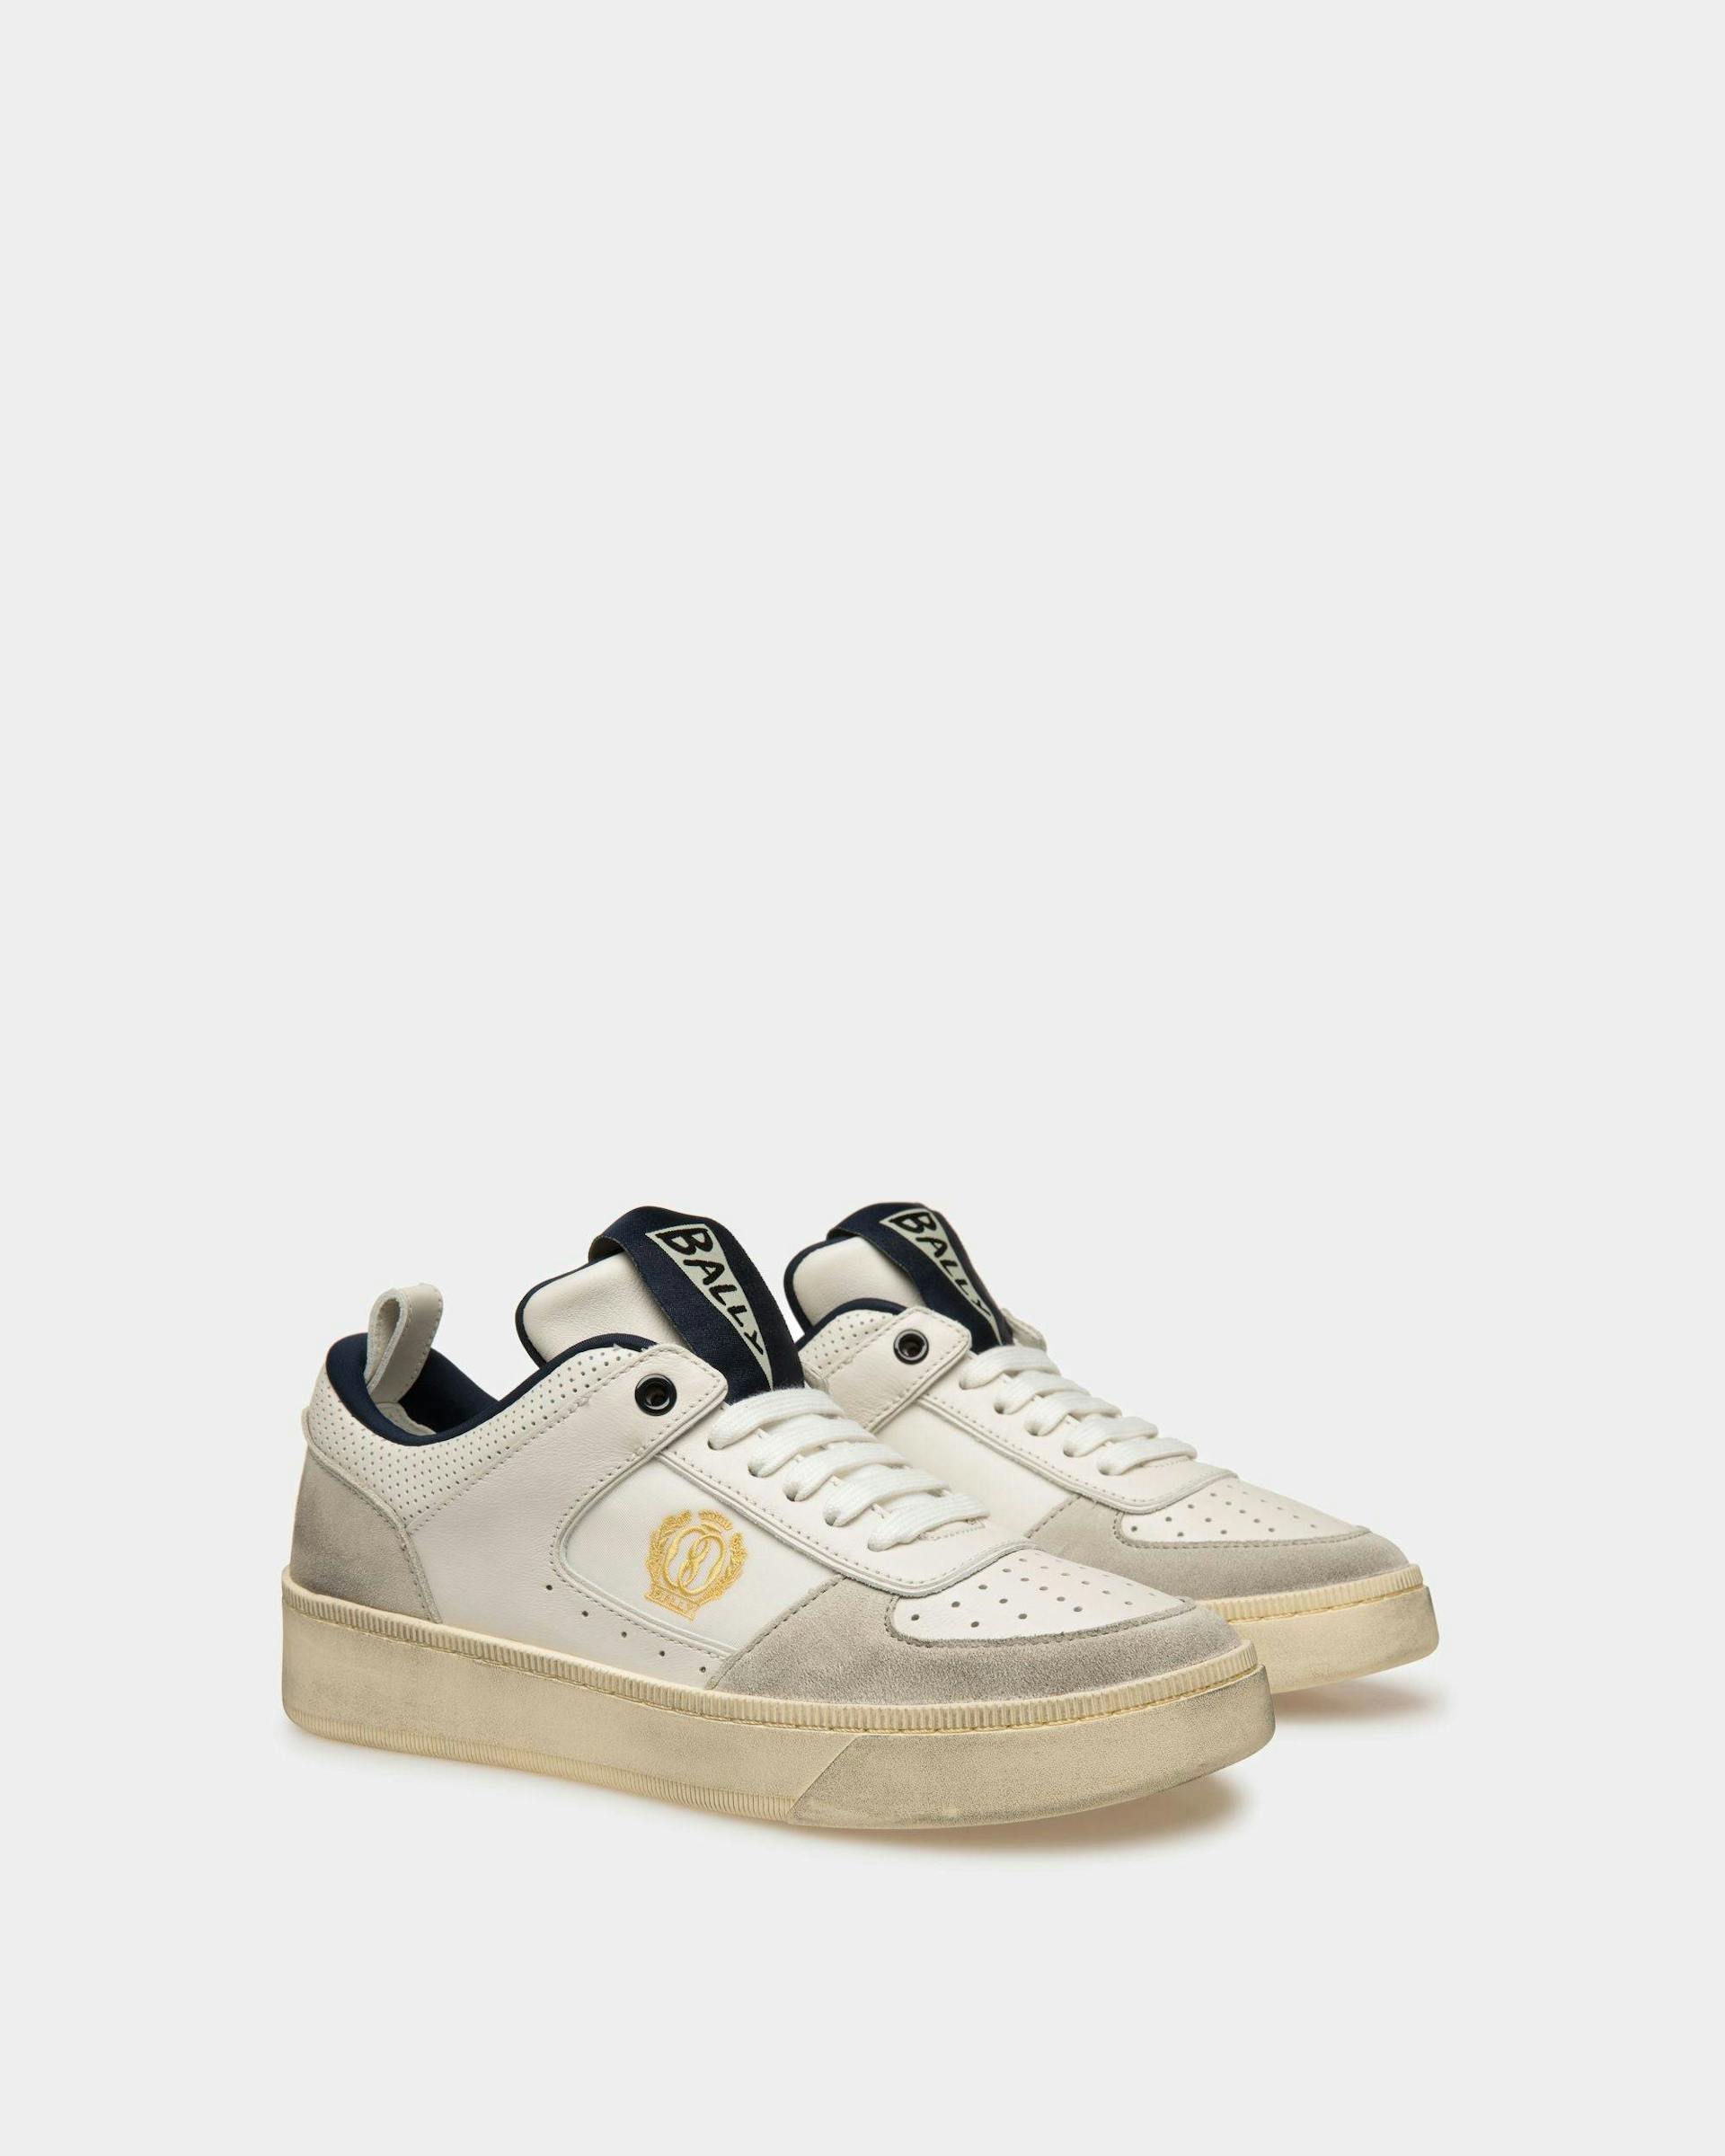 Raise Sneakers In Dusty White And Midnight Leather - Women's - Bally - 02